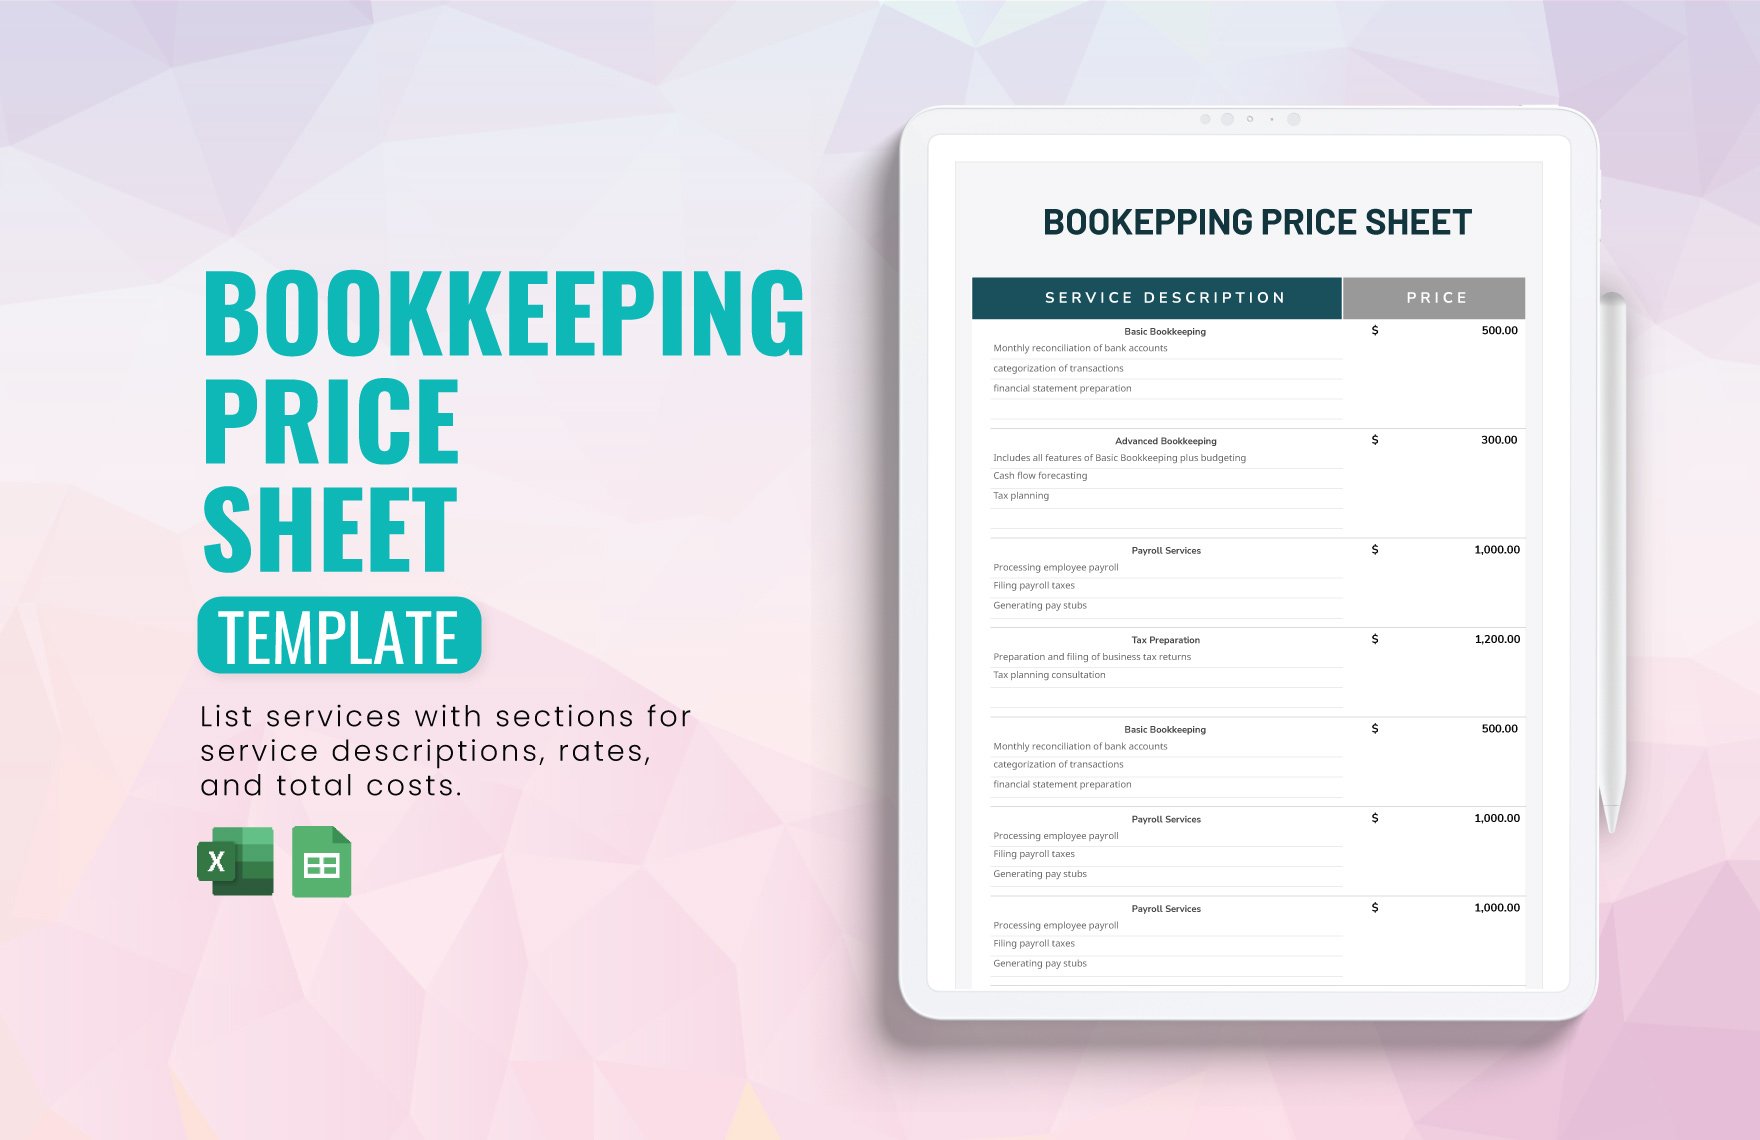 Bookkeeping Price Sheet Template in Excel, Google Sheets